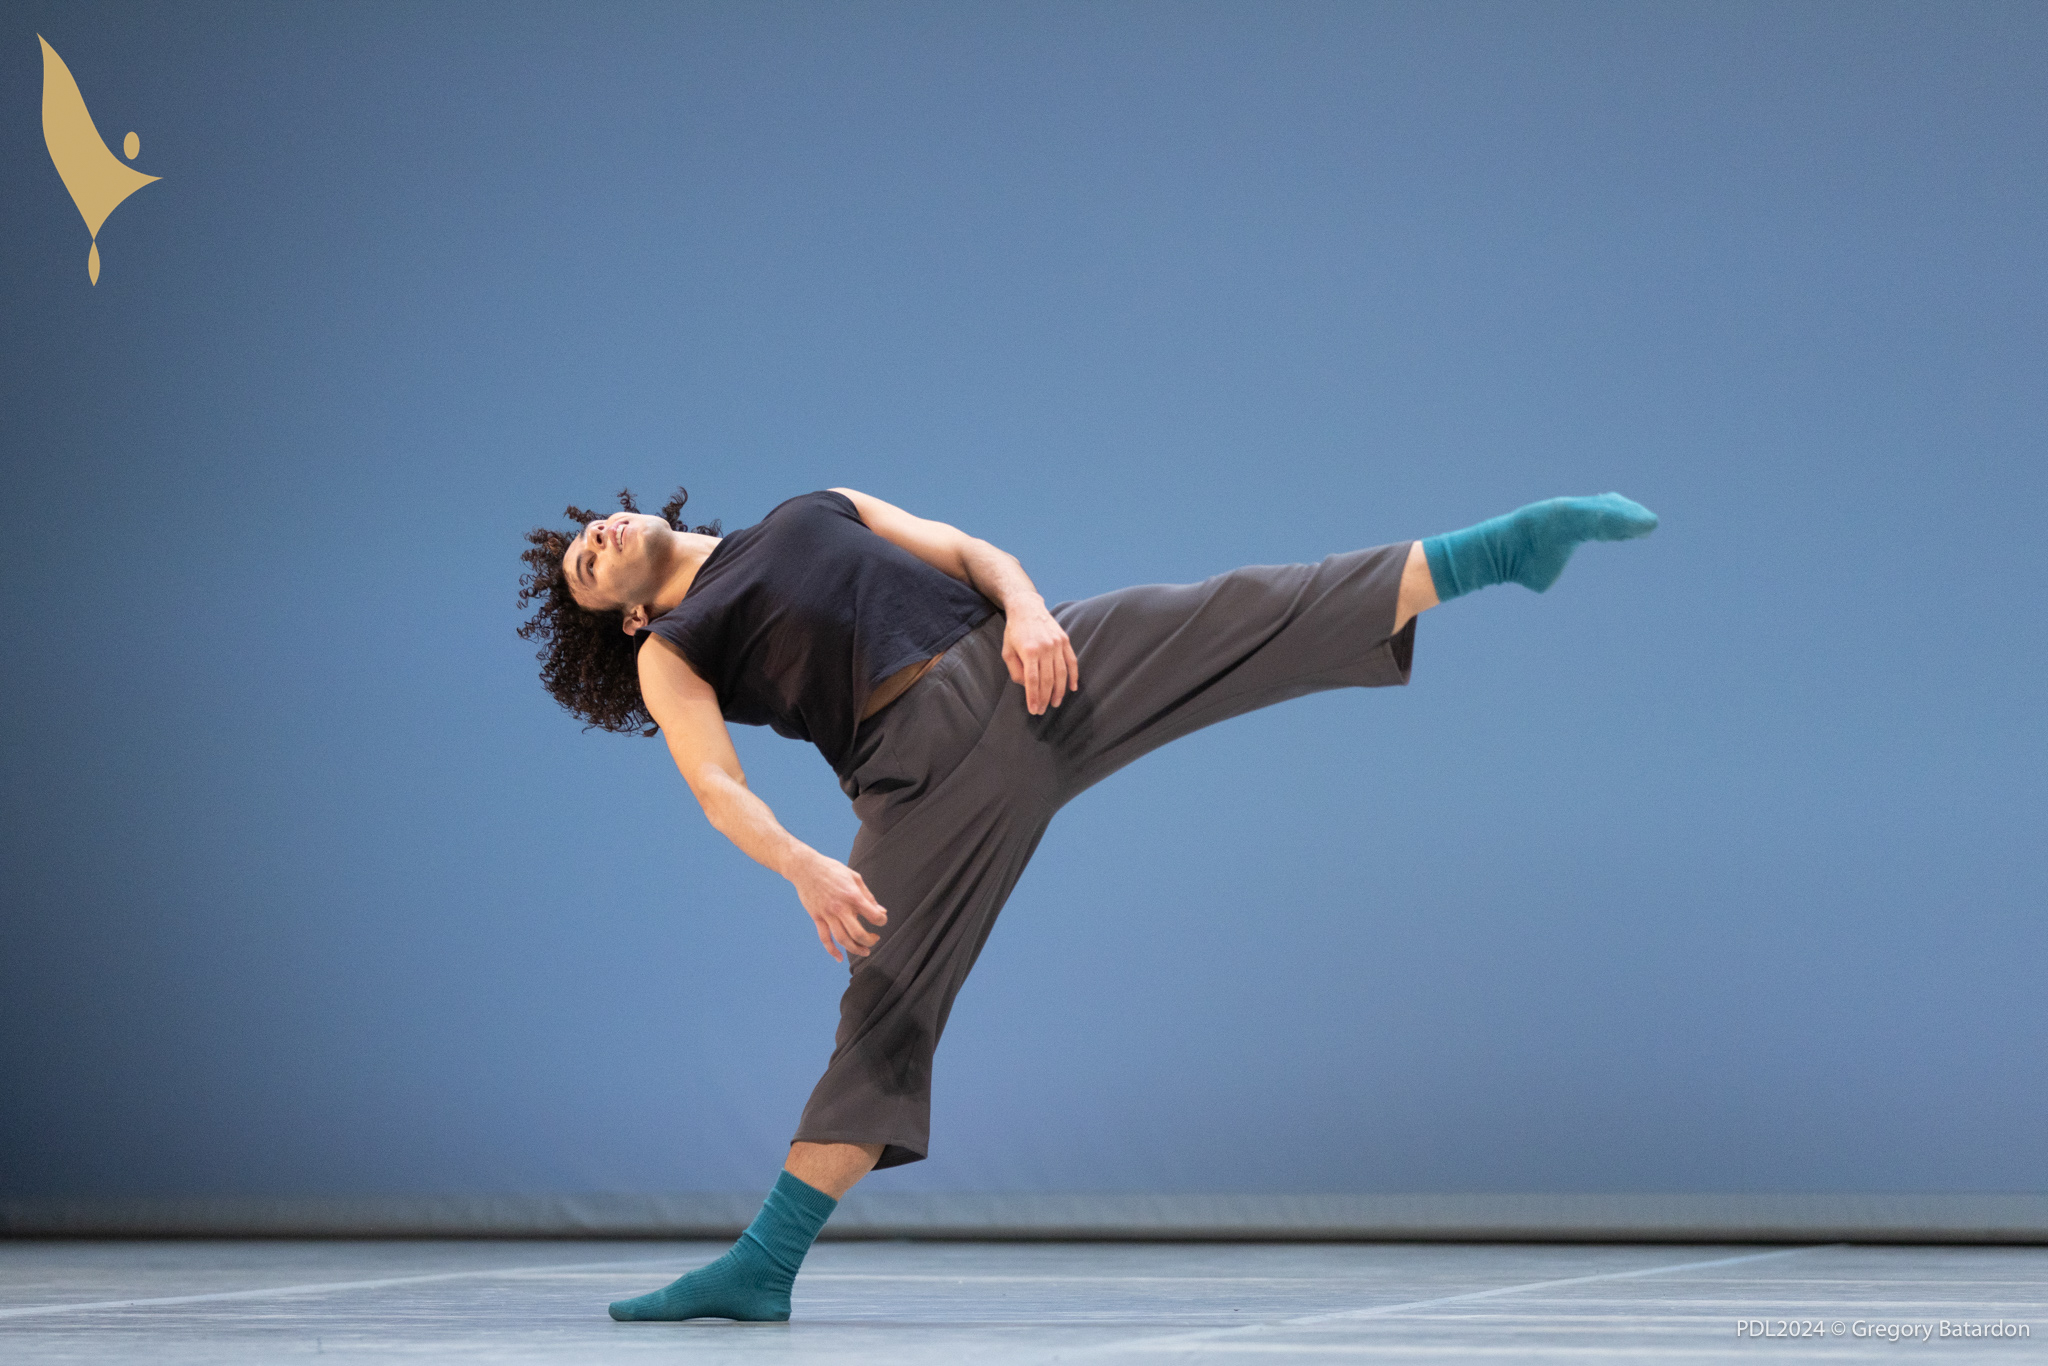 Miguel Artur Alves Oliveira dances onstage, leaning back and doing a layout with his left leg while keeping his arms relazed at his sides. He wears a black sleeveless t-shirt, loose-fitting gray sweatpants and blue socks.